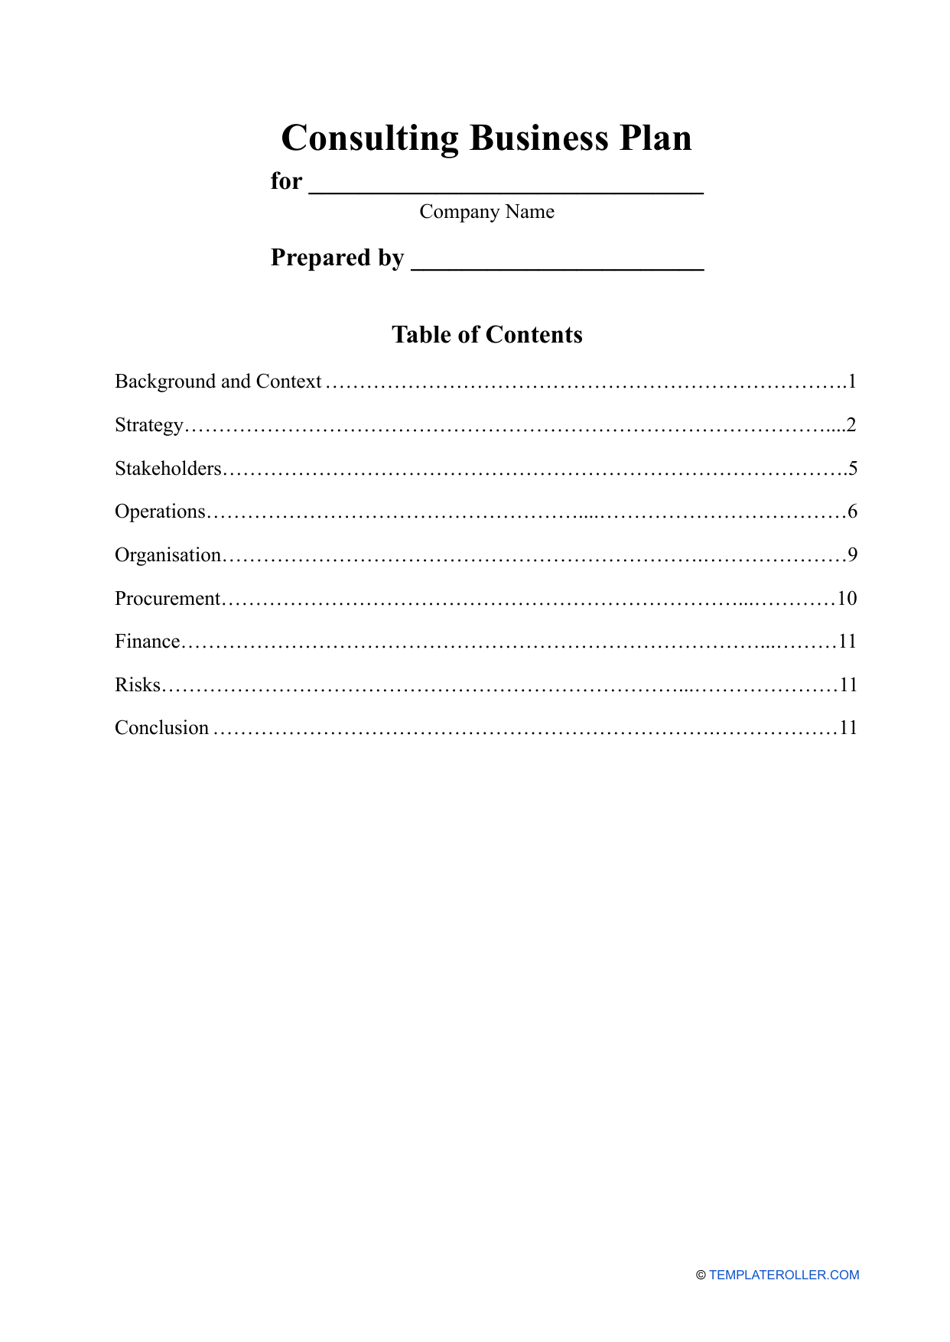 Consulting Business Plan Template Fill Out Sign Online and Download